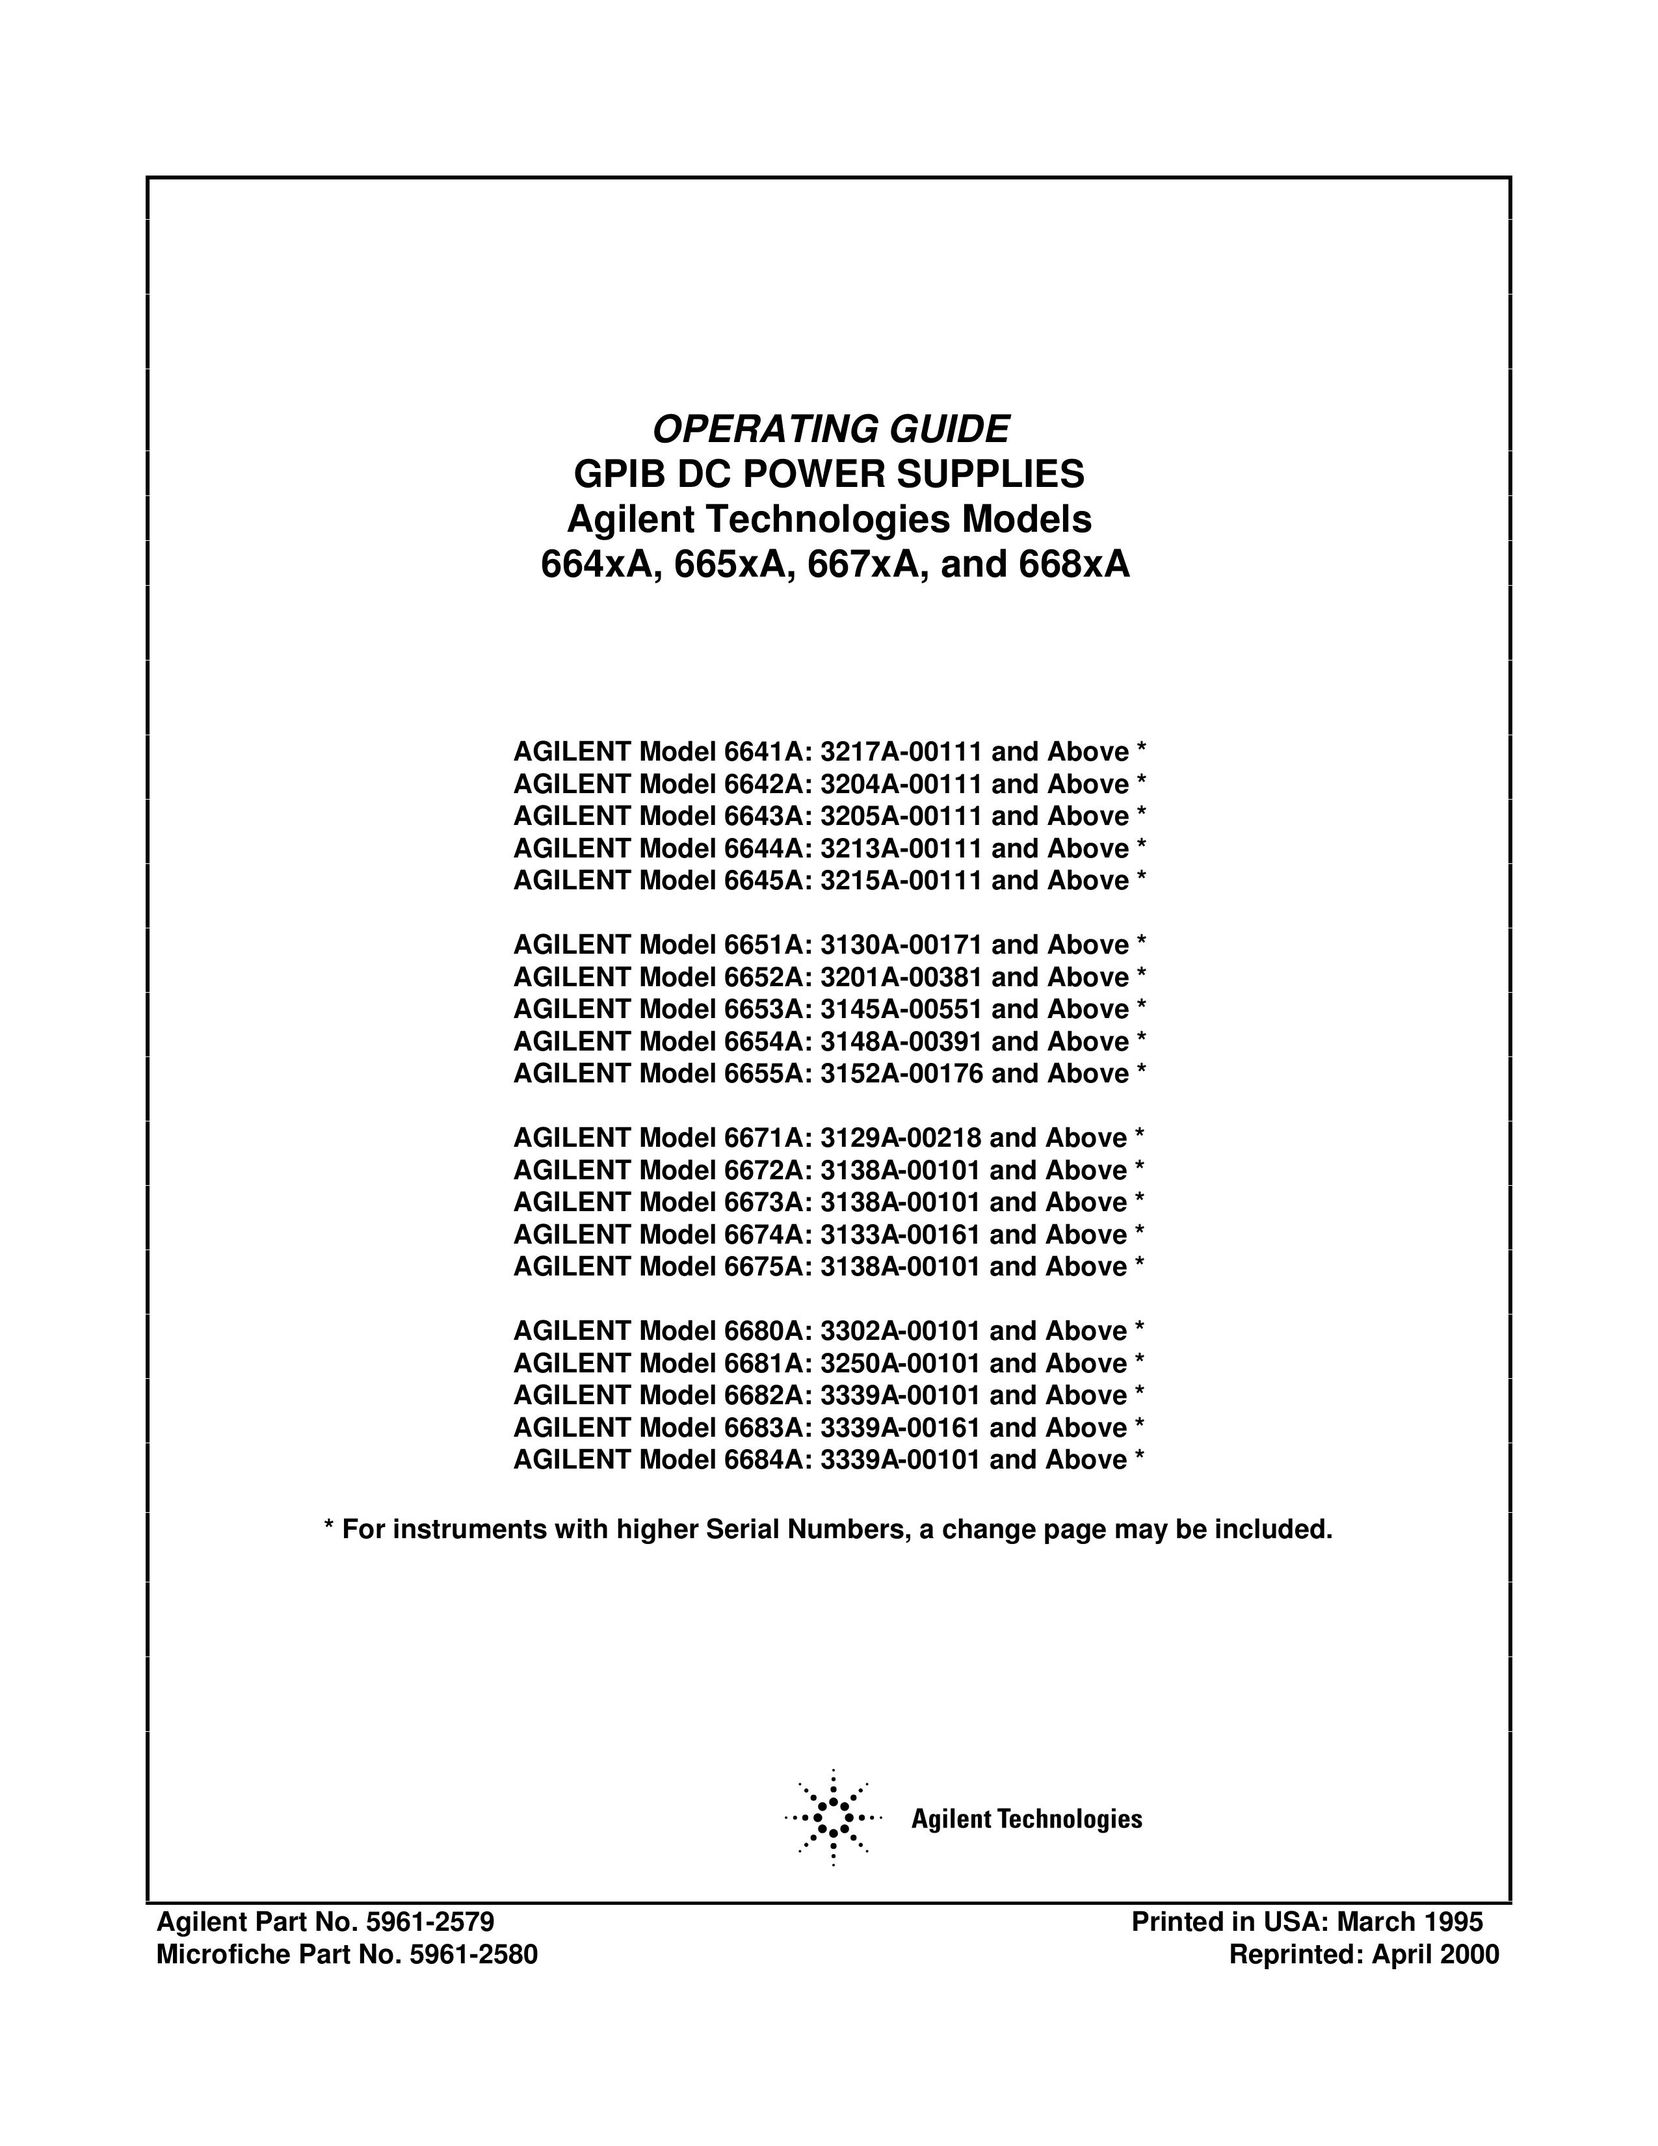 Agilent Technologies Model 6682A: 3339A-00101 Video Gaming Accessories User Manual (Page 1)